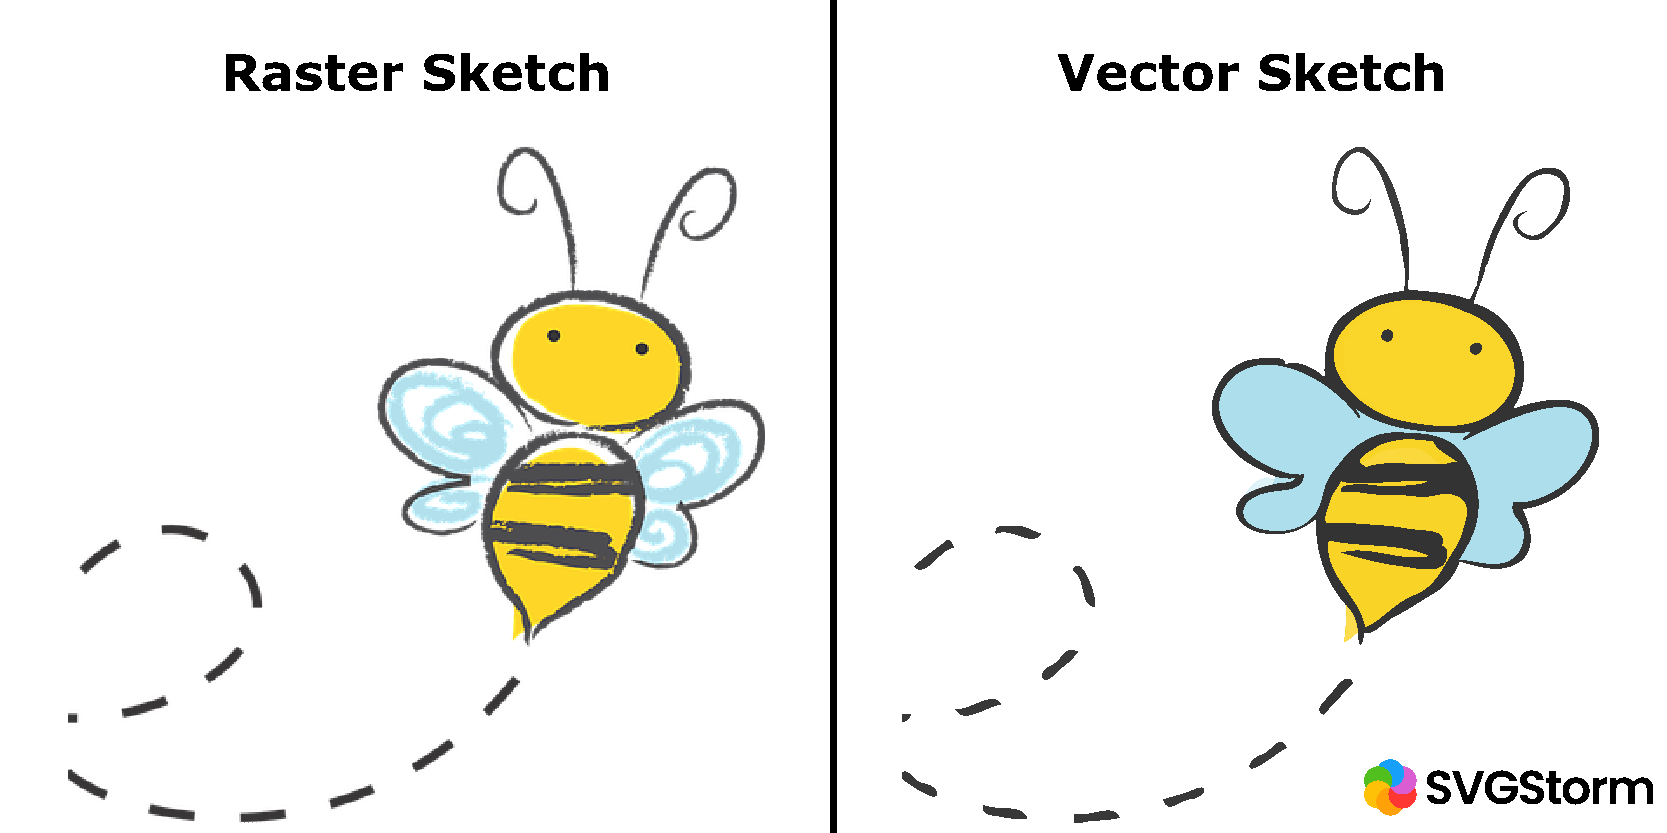 How to turn your sketch to vector free online?